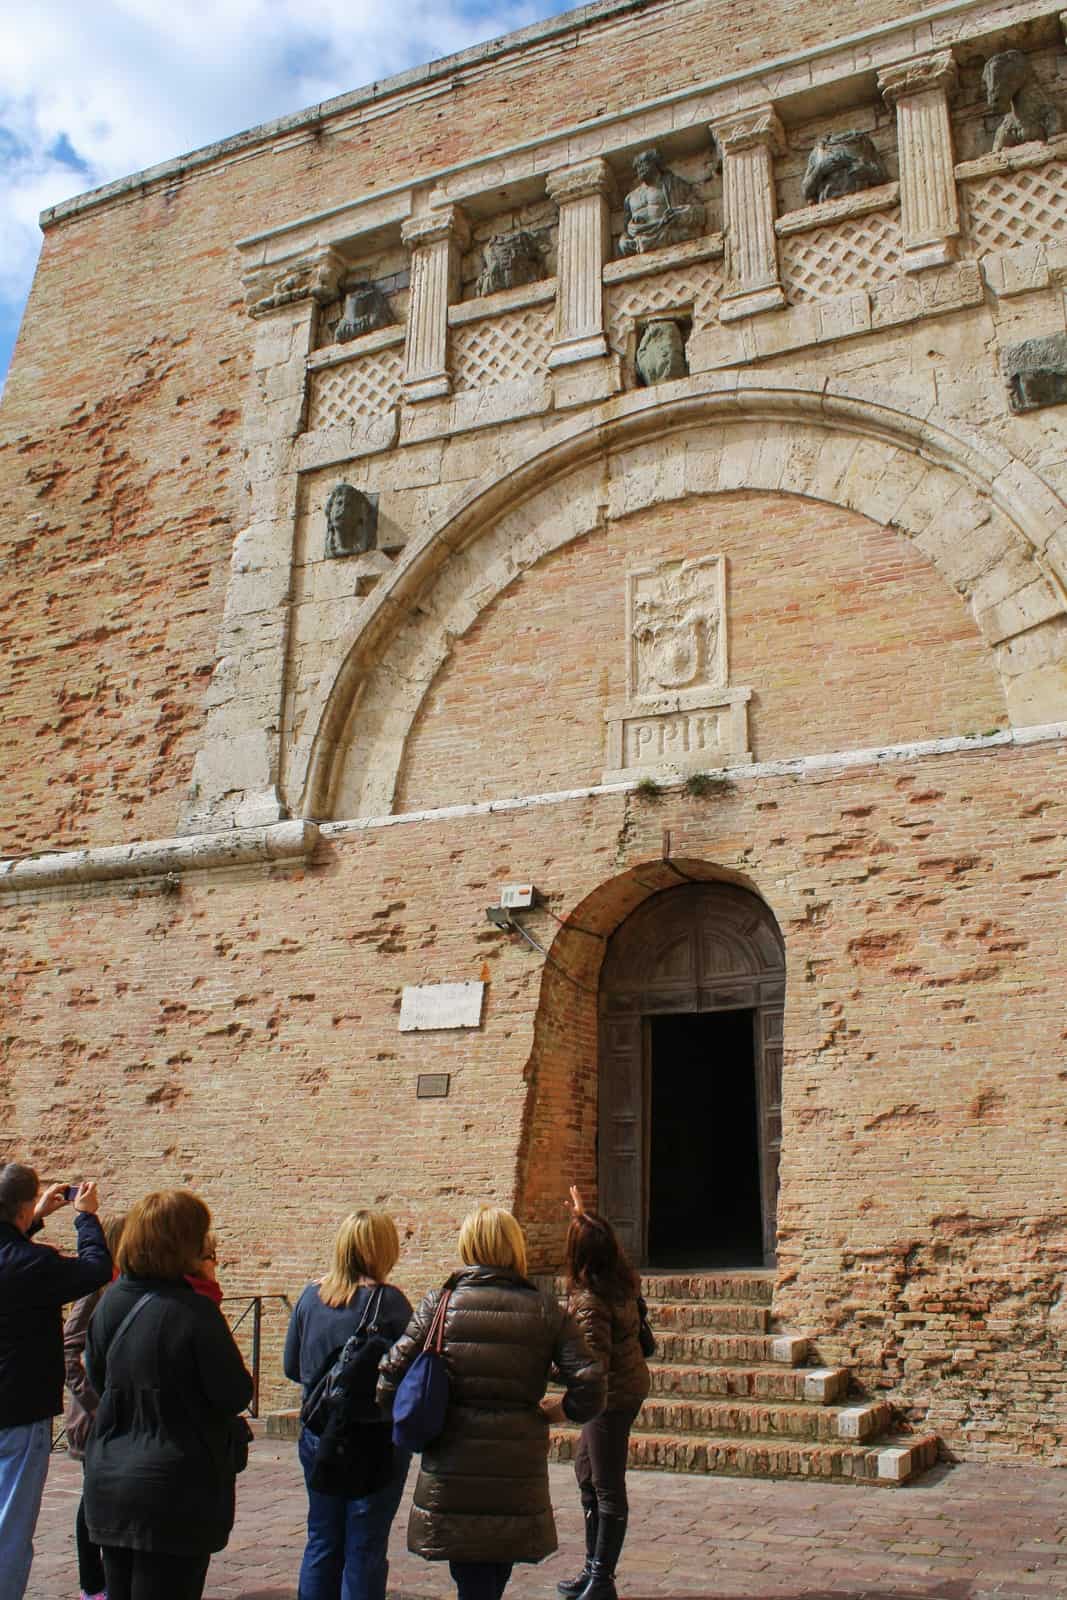 A tour group looking up to the stone archway on the golden brick Rocca Paolina Fortress in Perugia, Italy. 